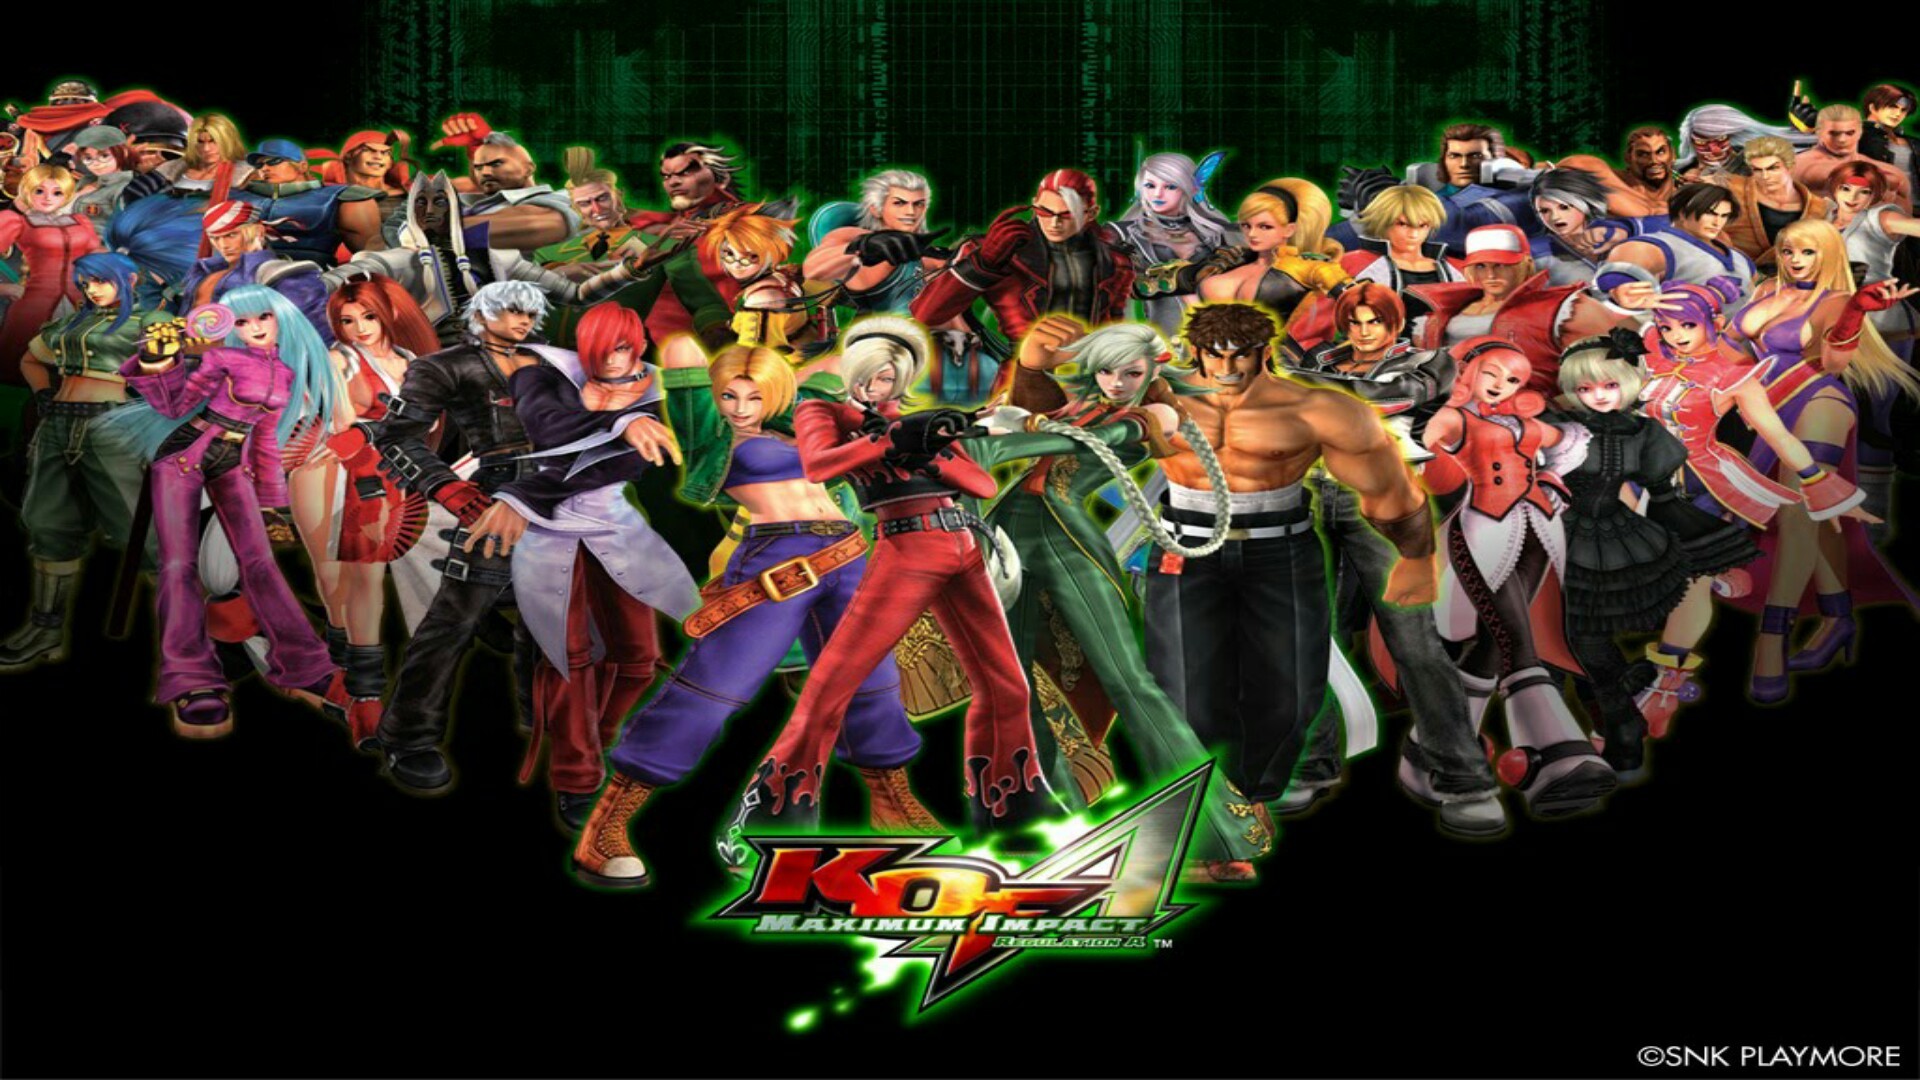 1920x1080 Download Wallpaper Â· The king of fighters